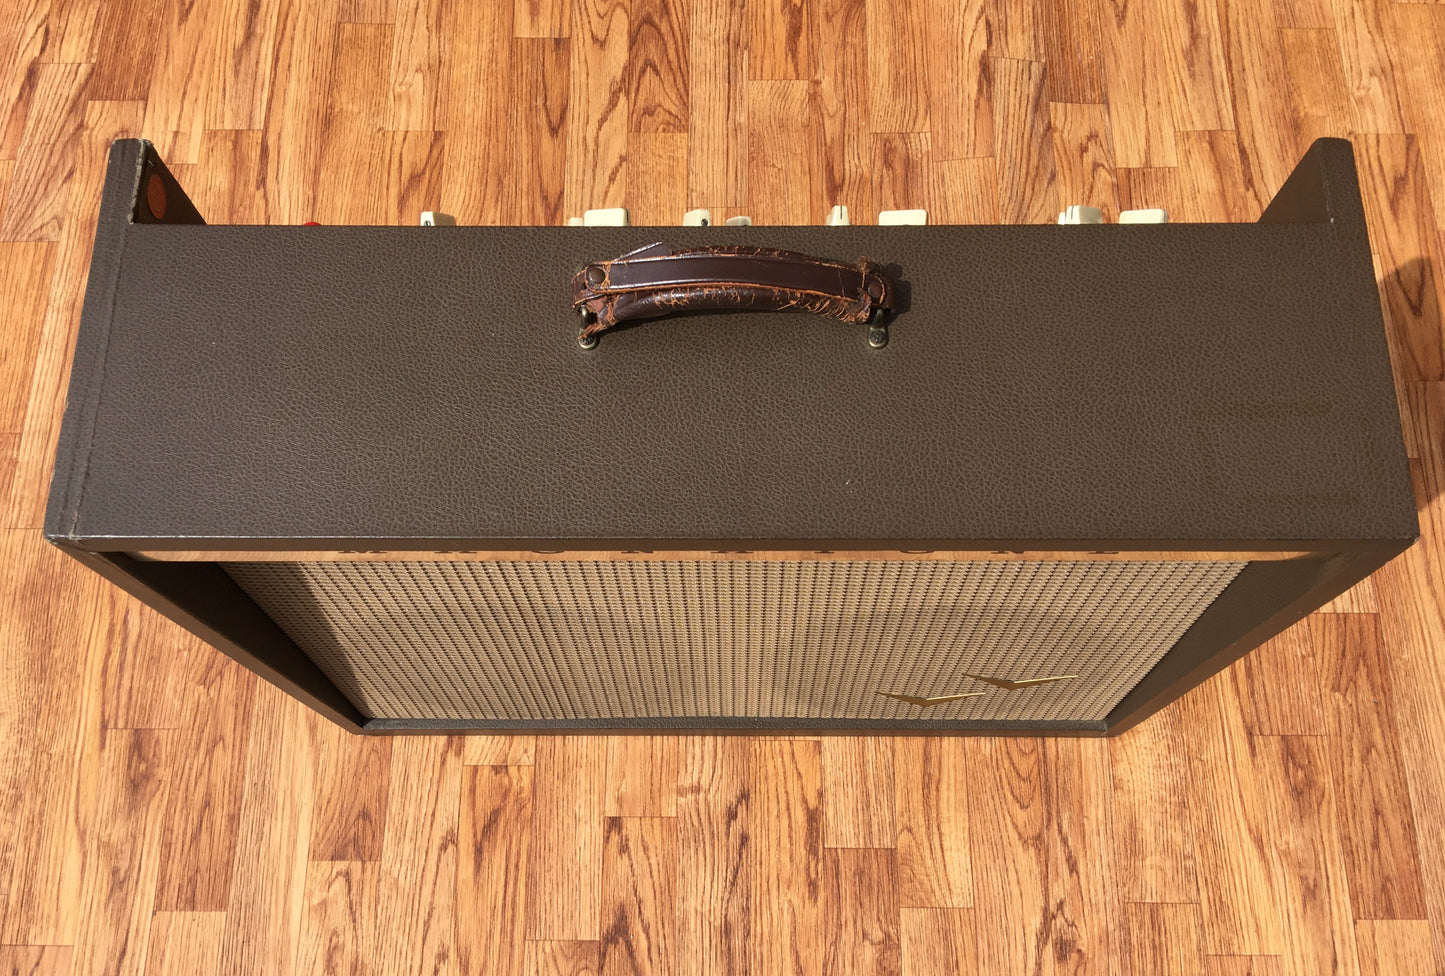 1959 Magnatone 280 Double V 2x12 High Fidelity Stereo Guitar Combo Amplifier Brown Tolex 280A